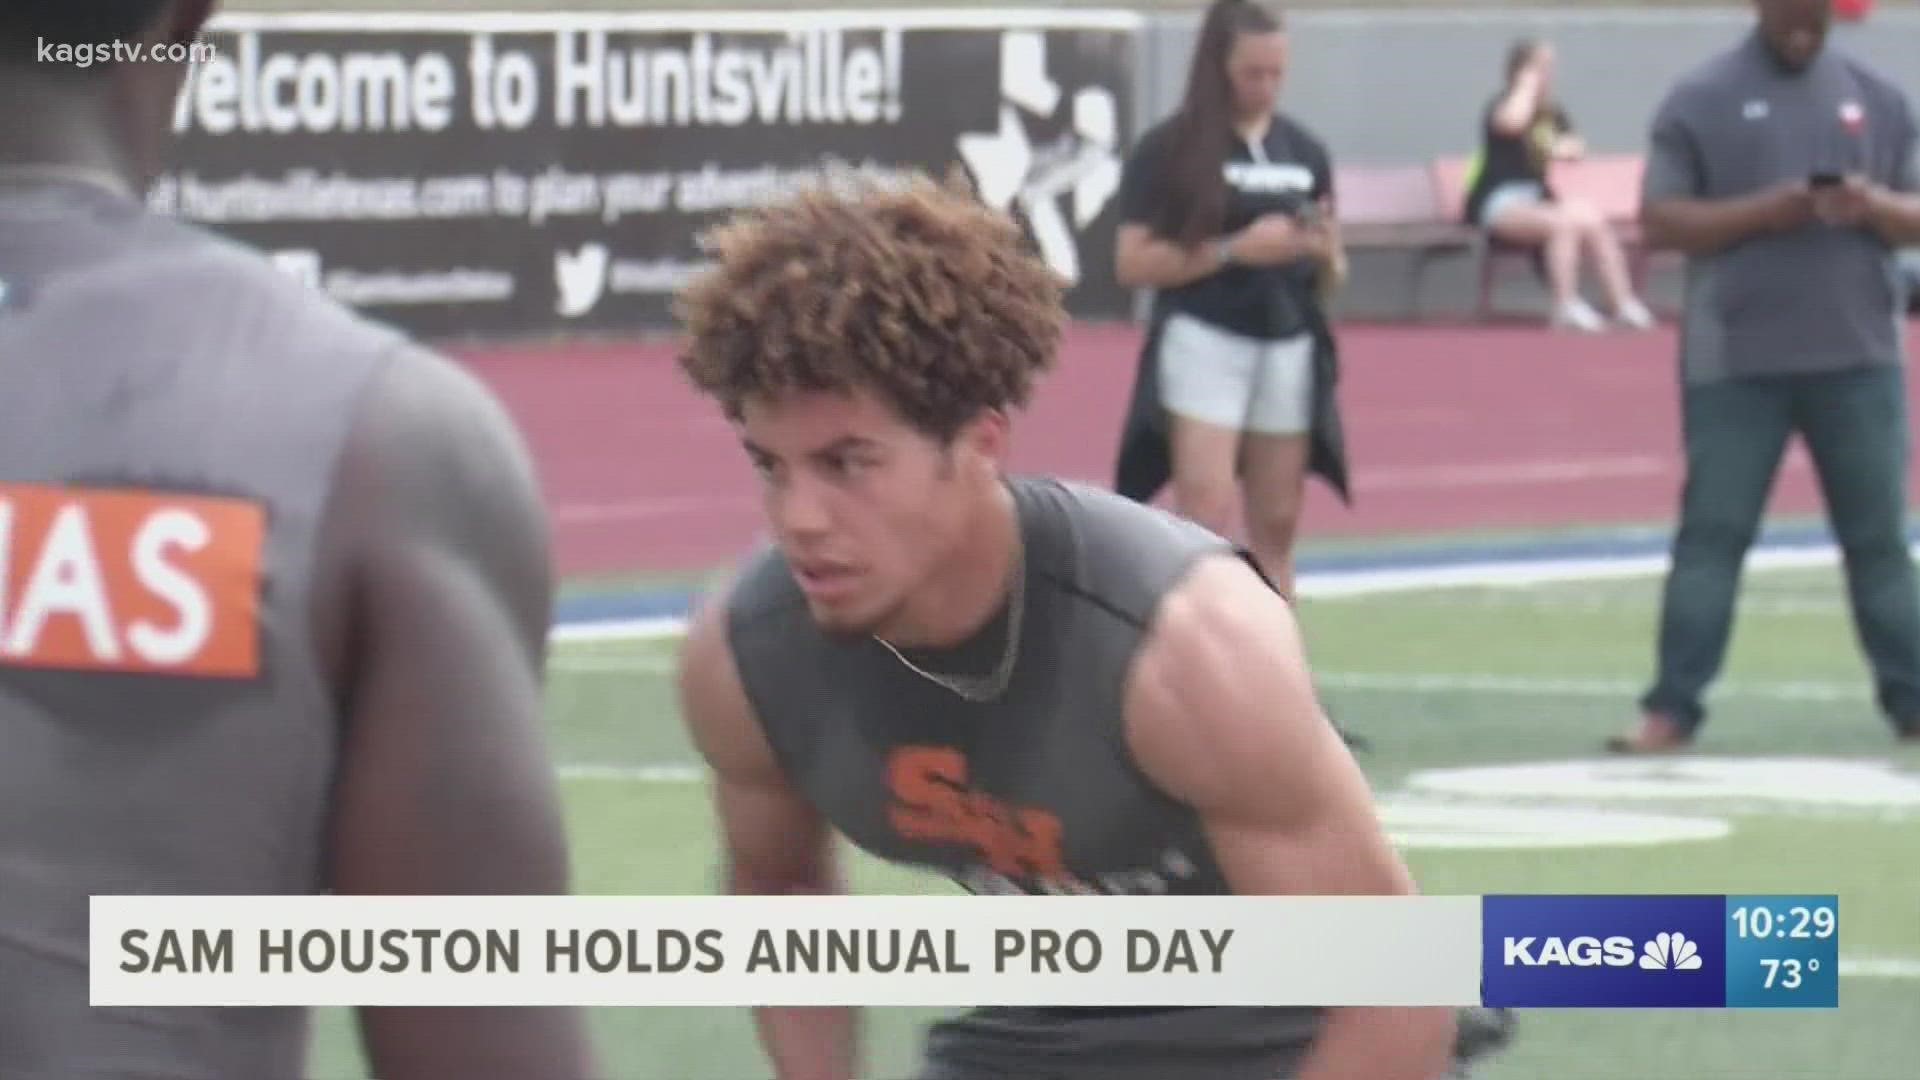 Nearly a dozen Bearkats, including All-American CB Zyon McCollum and QB Eric Schmid, performed in front of a large crowd of NFL scouts and coaches in Huntsville.